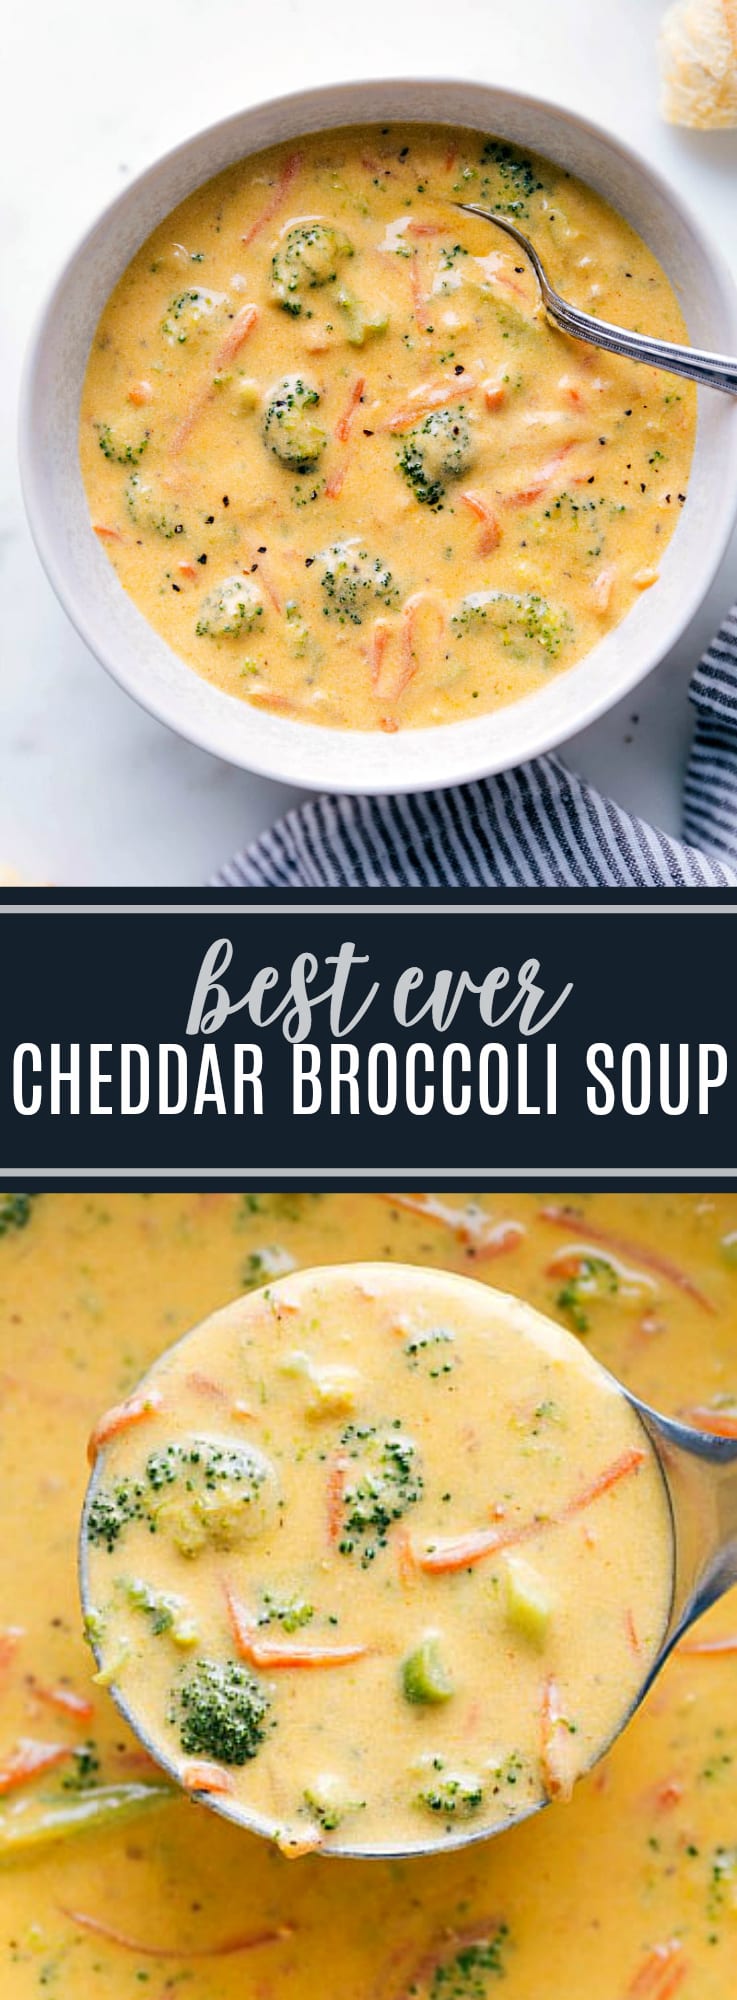 Creamy & delicious broccoli cheddar soup made in ONE POT on the stovetop. This soup is easy to make and full of flavor (the